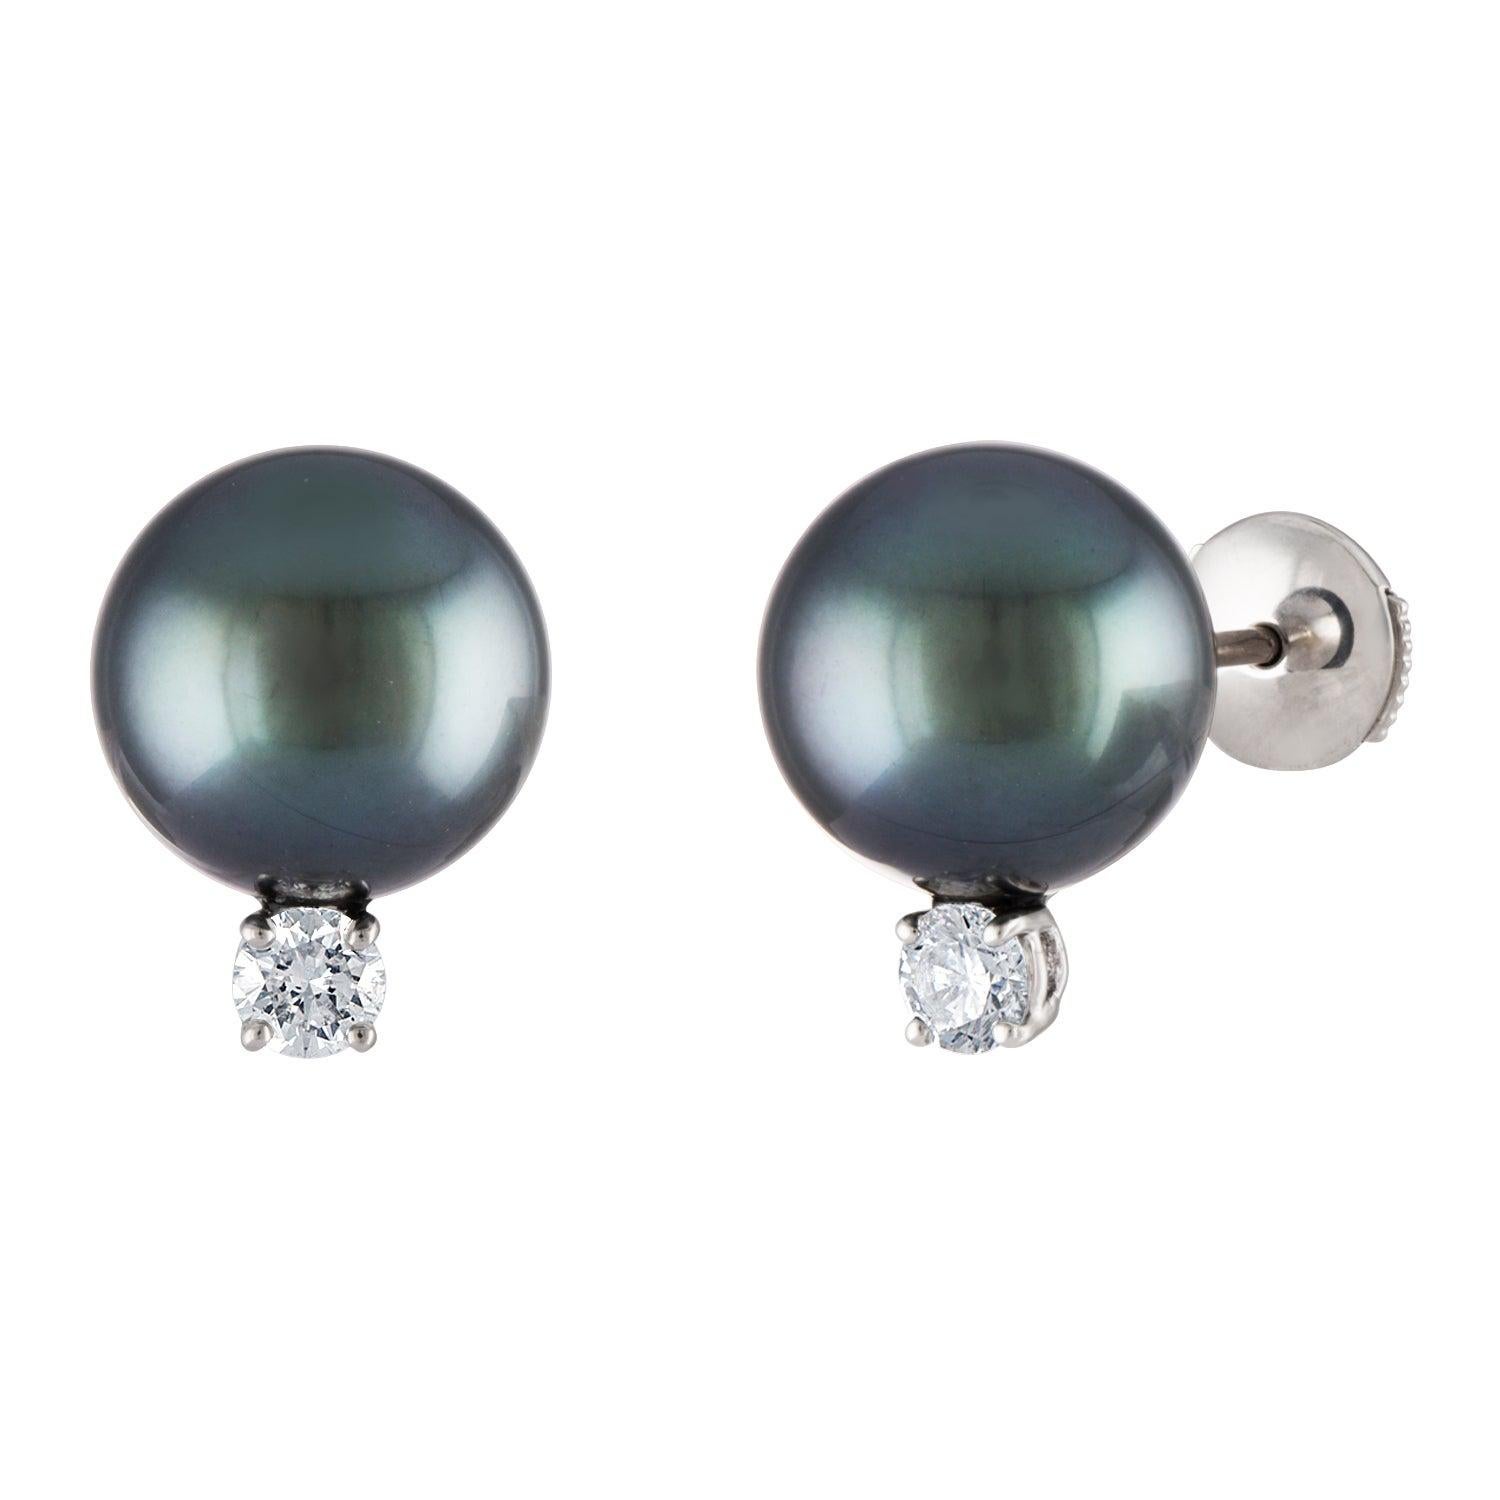 These classic South Sea Tahitian pearl earrings feature round 10.5mm pearls atop 0.20 total carats of diamonds. The earrings are set on 14 karat white gold. 
Perfect for weddings, anniversaries, birthdays and graduations. Symbolizing purity and